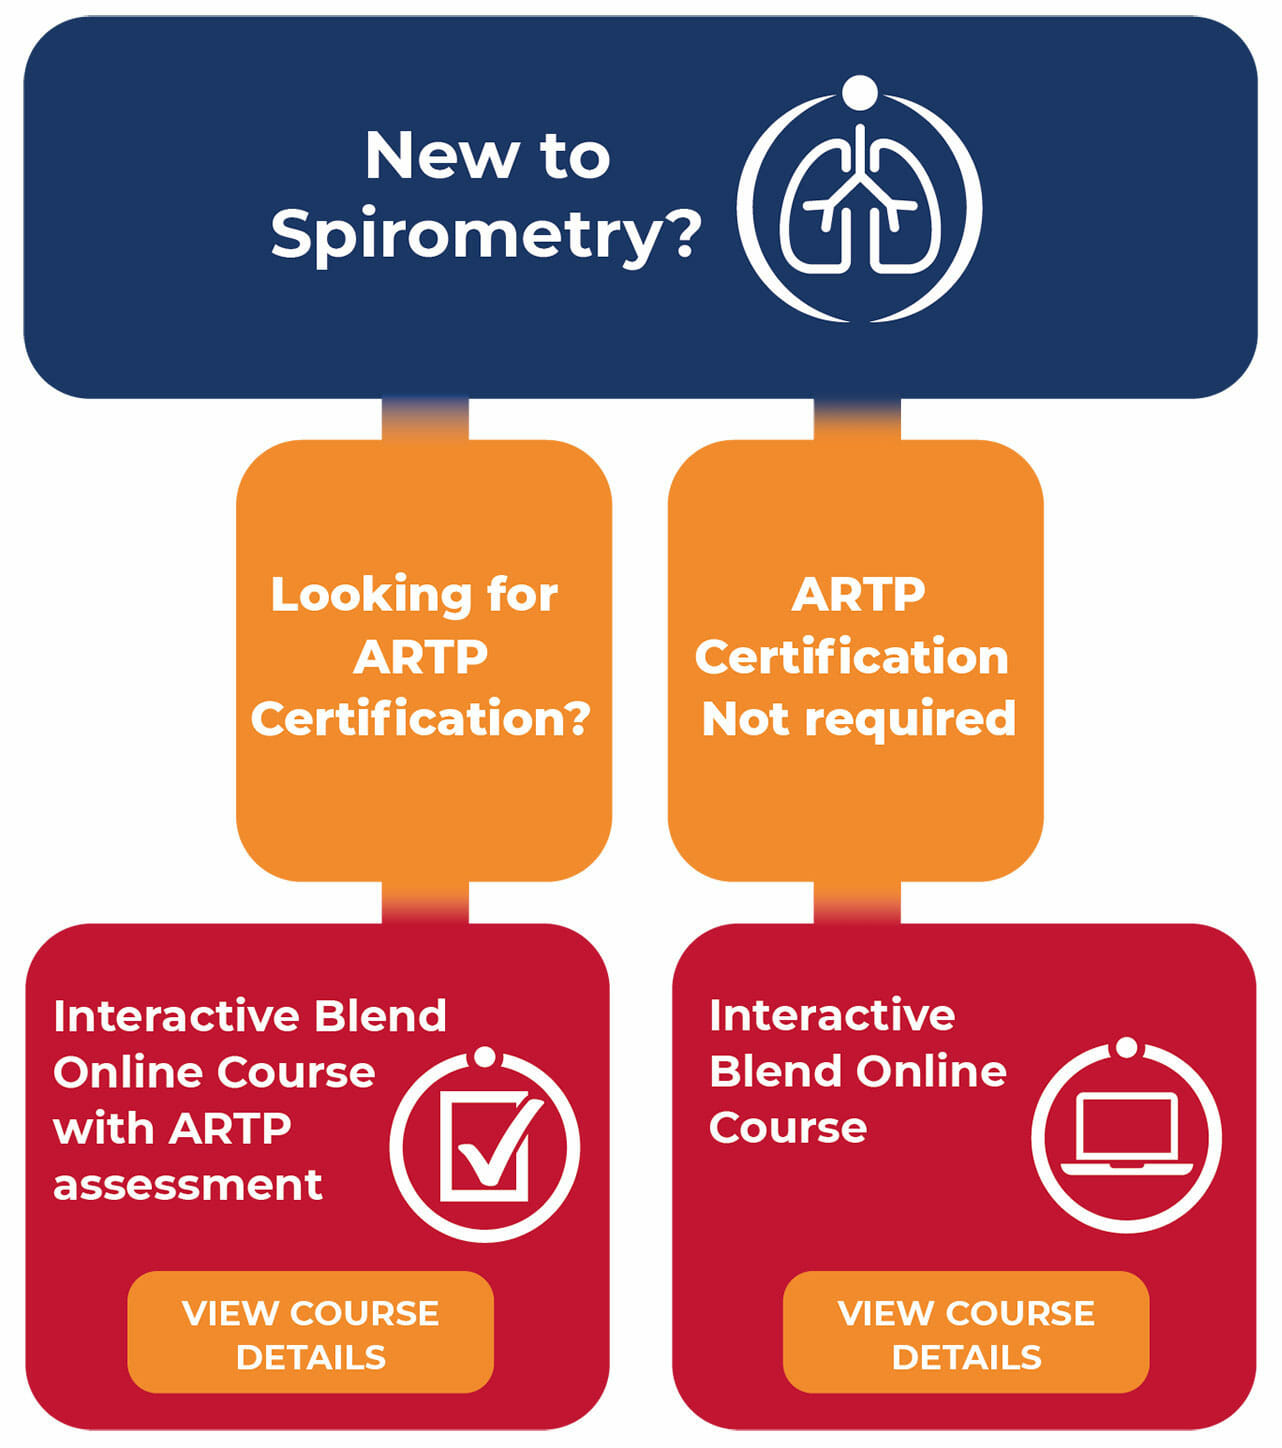 New to Spirometry Learning Courses